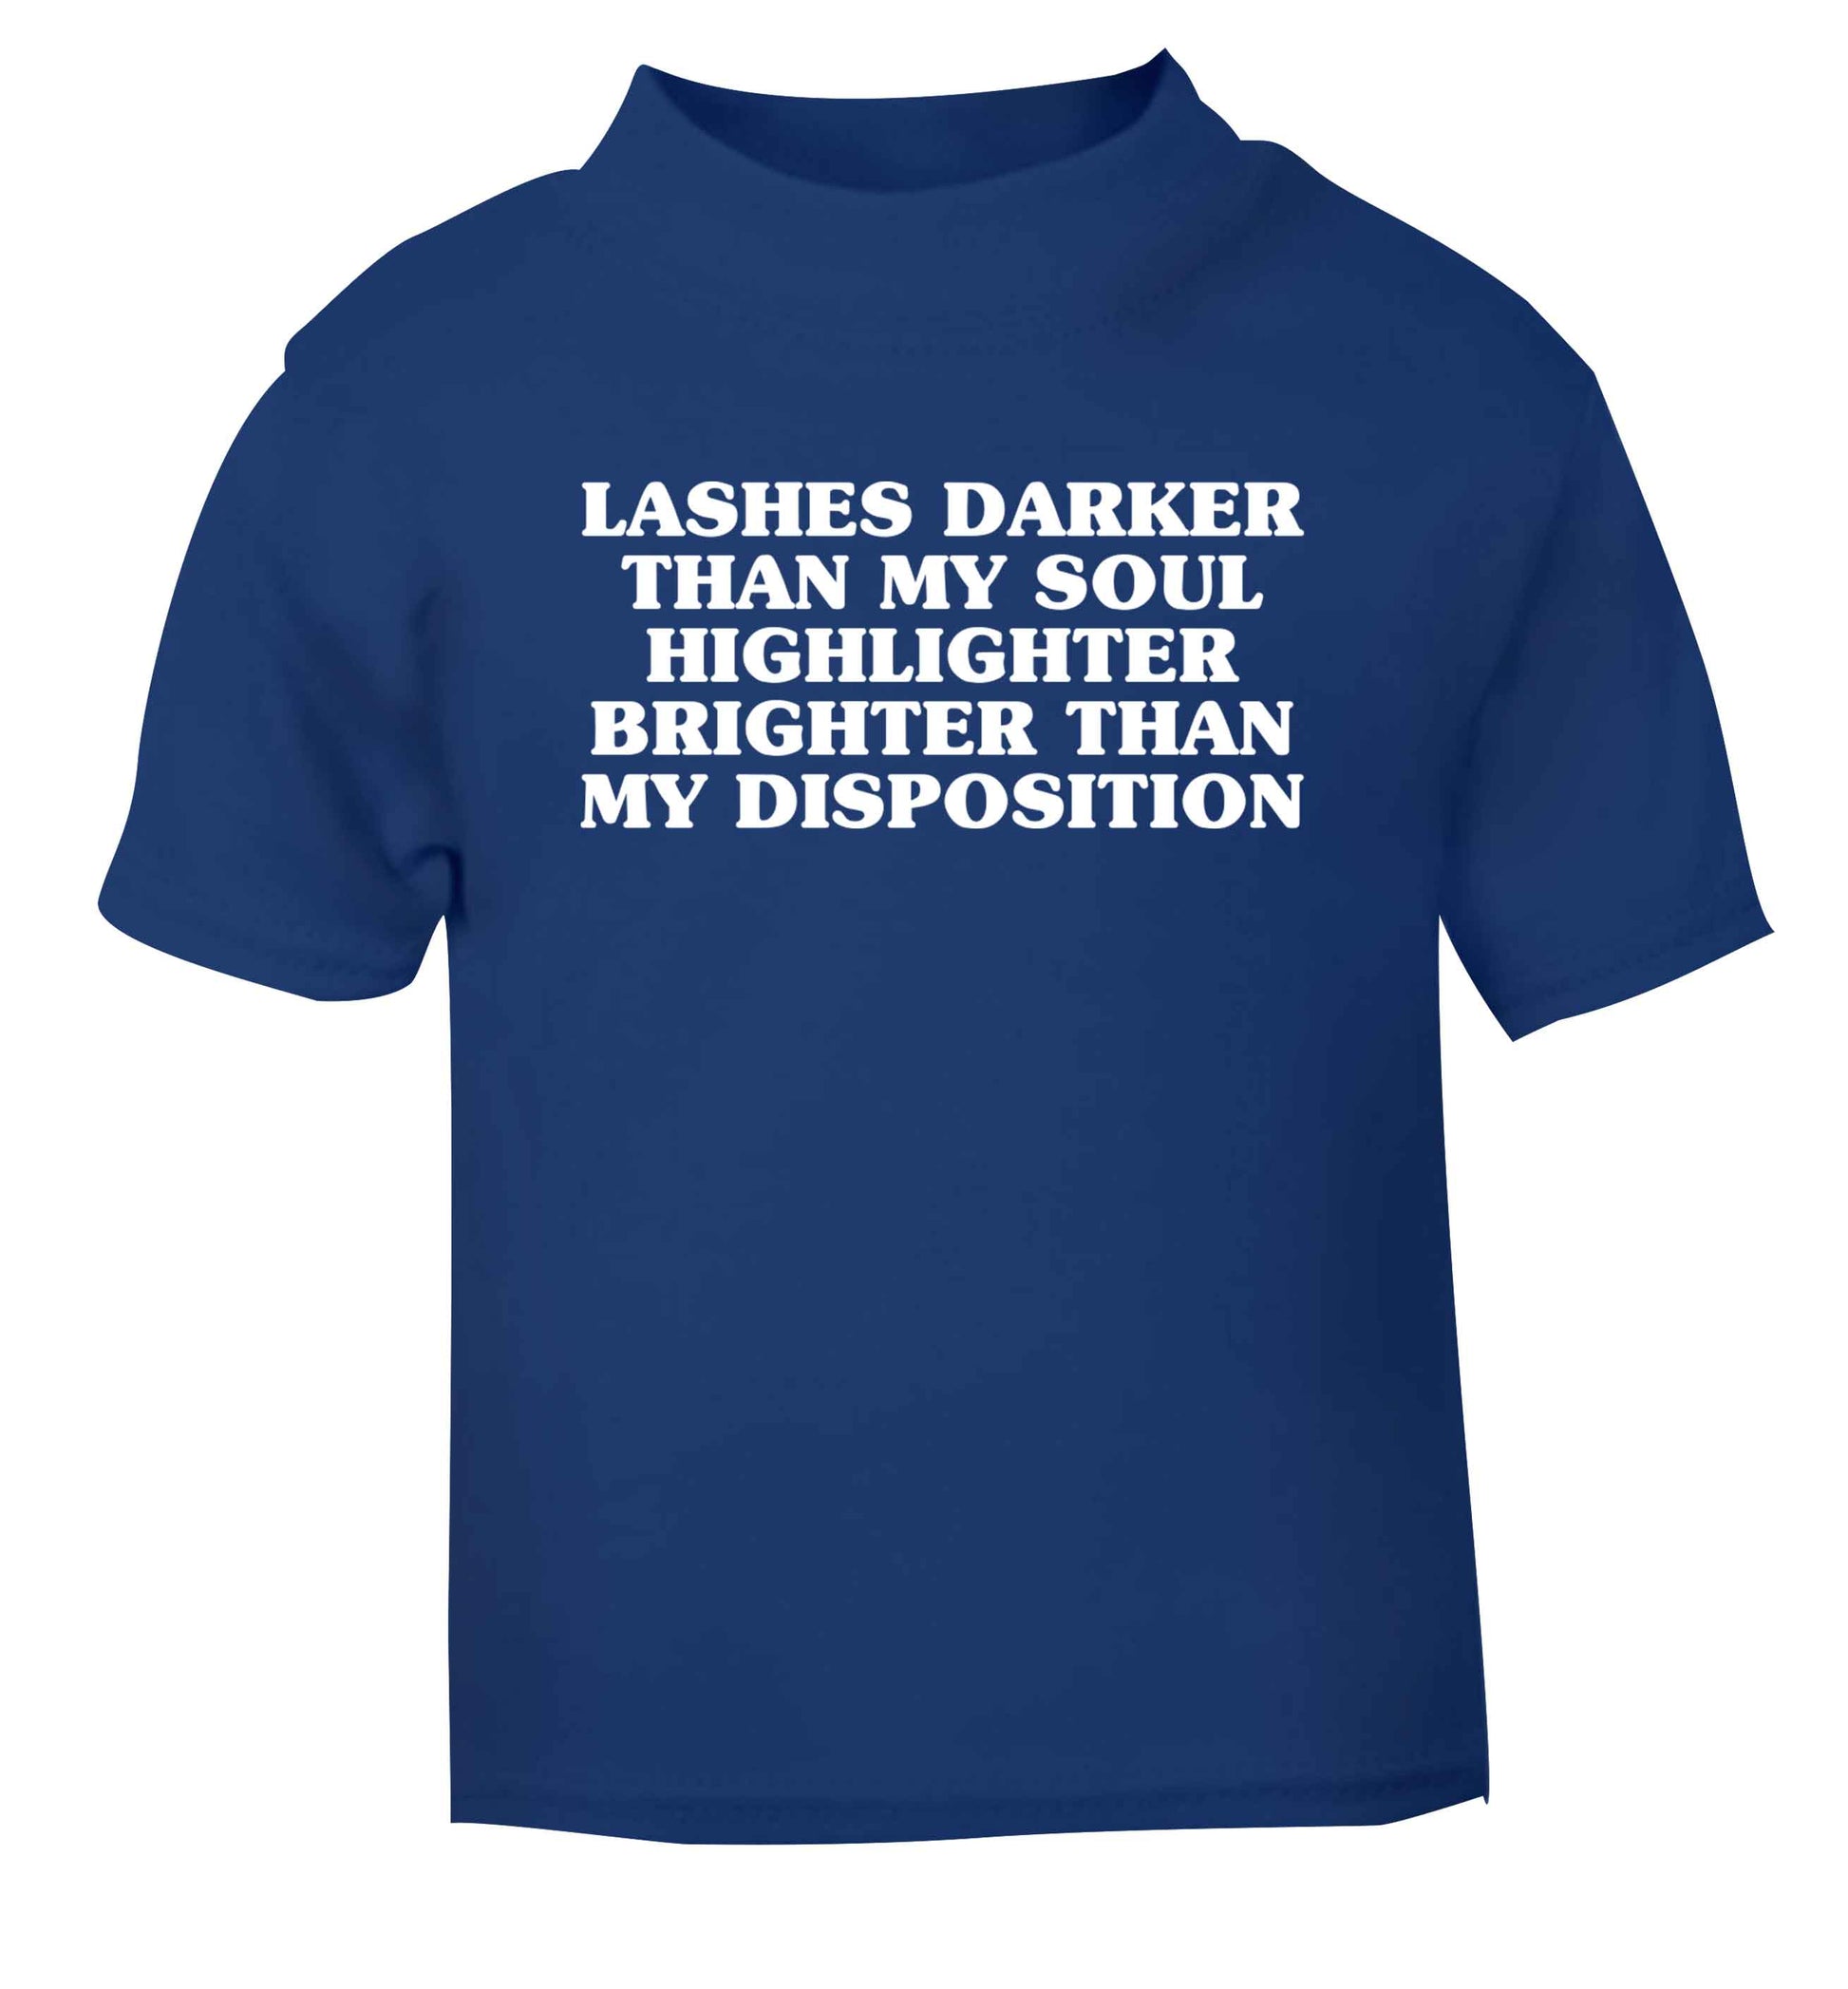 Lashes darker than my soul, highlighter brighter than my disposition blue Baby Toddler Tshirt 2 Years